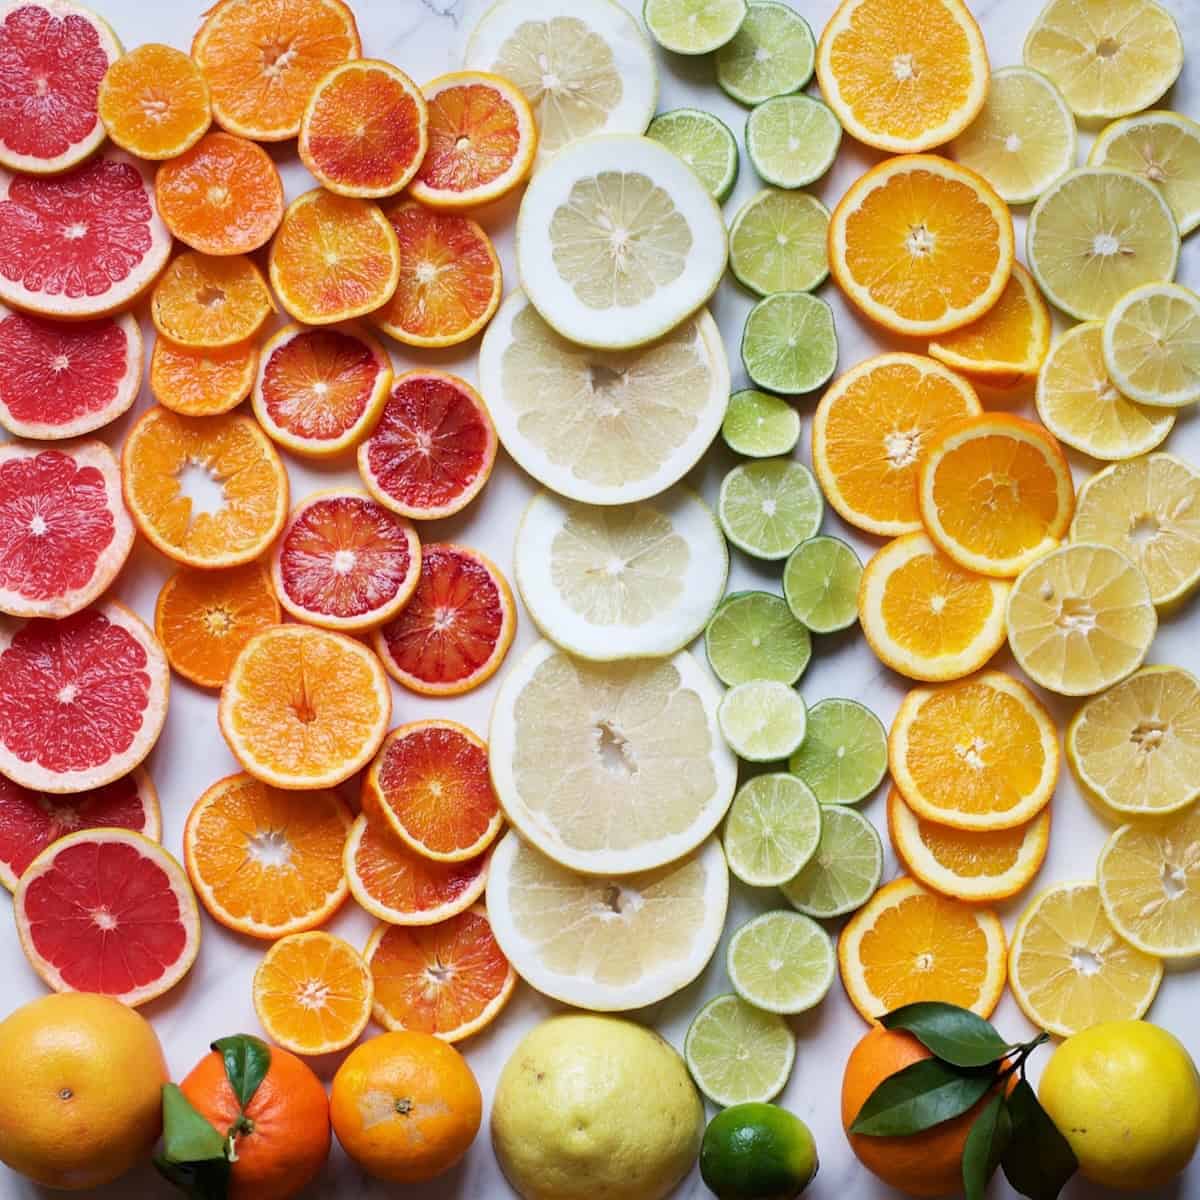 Different types of citrus cut into slices